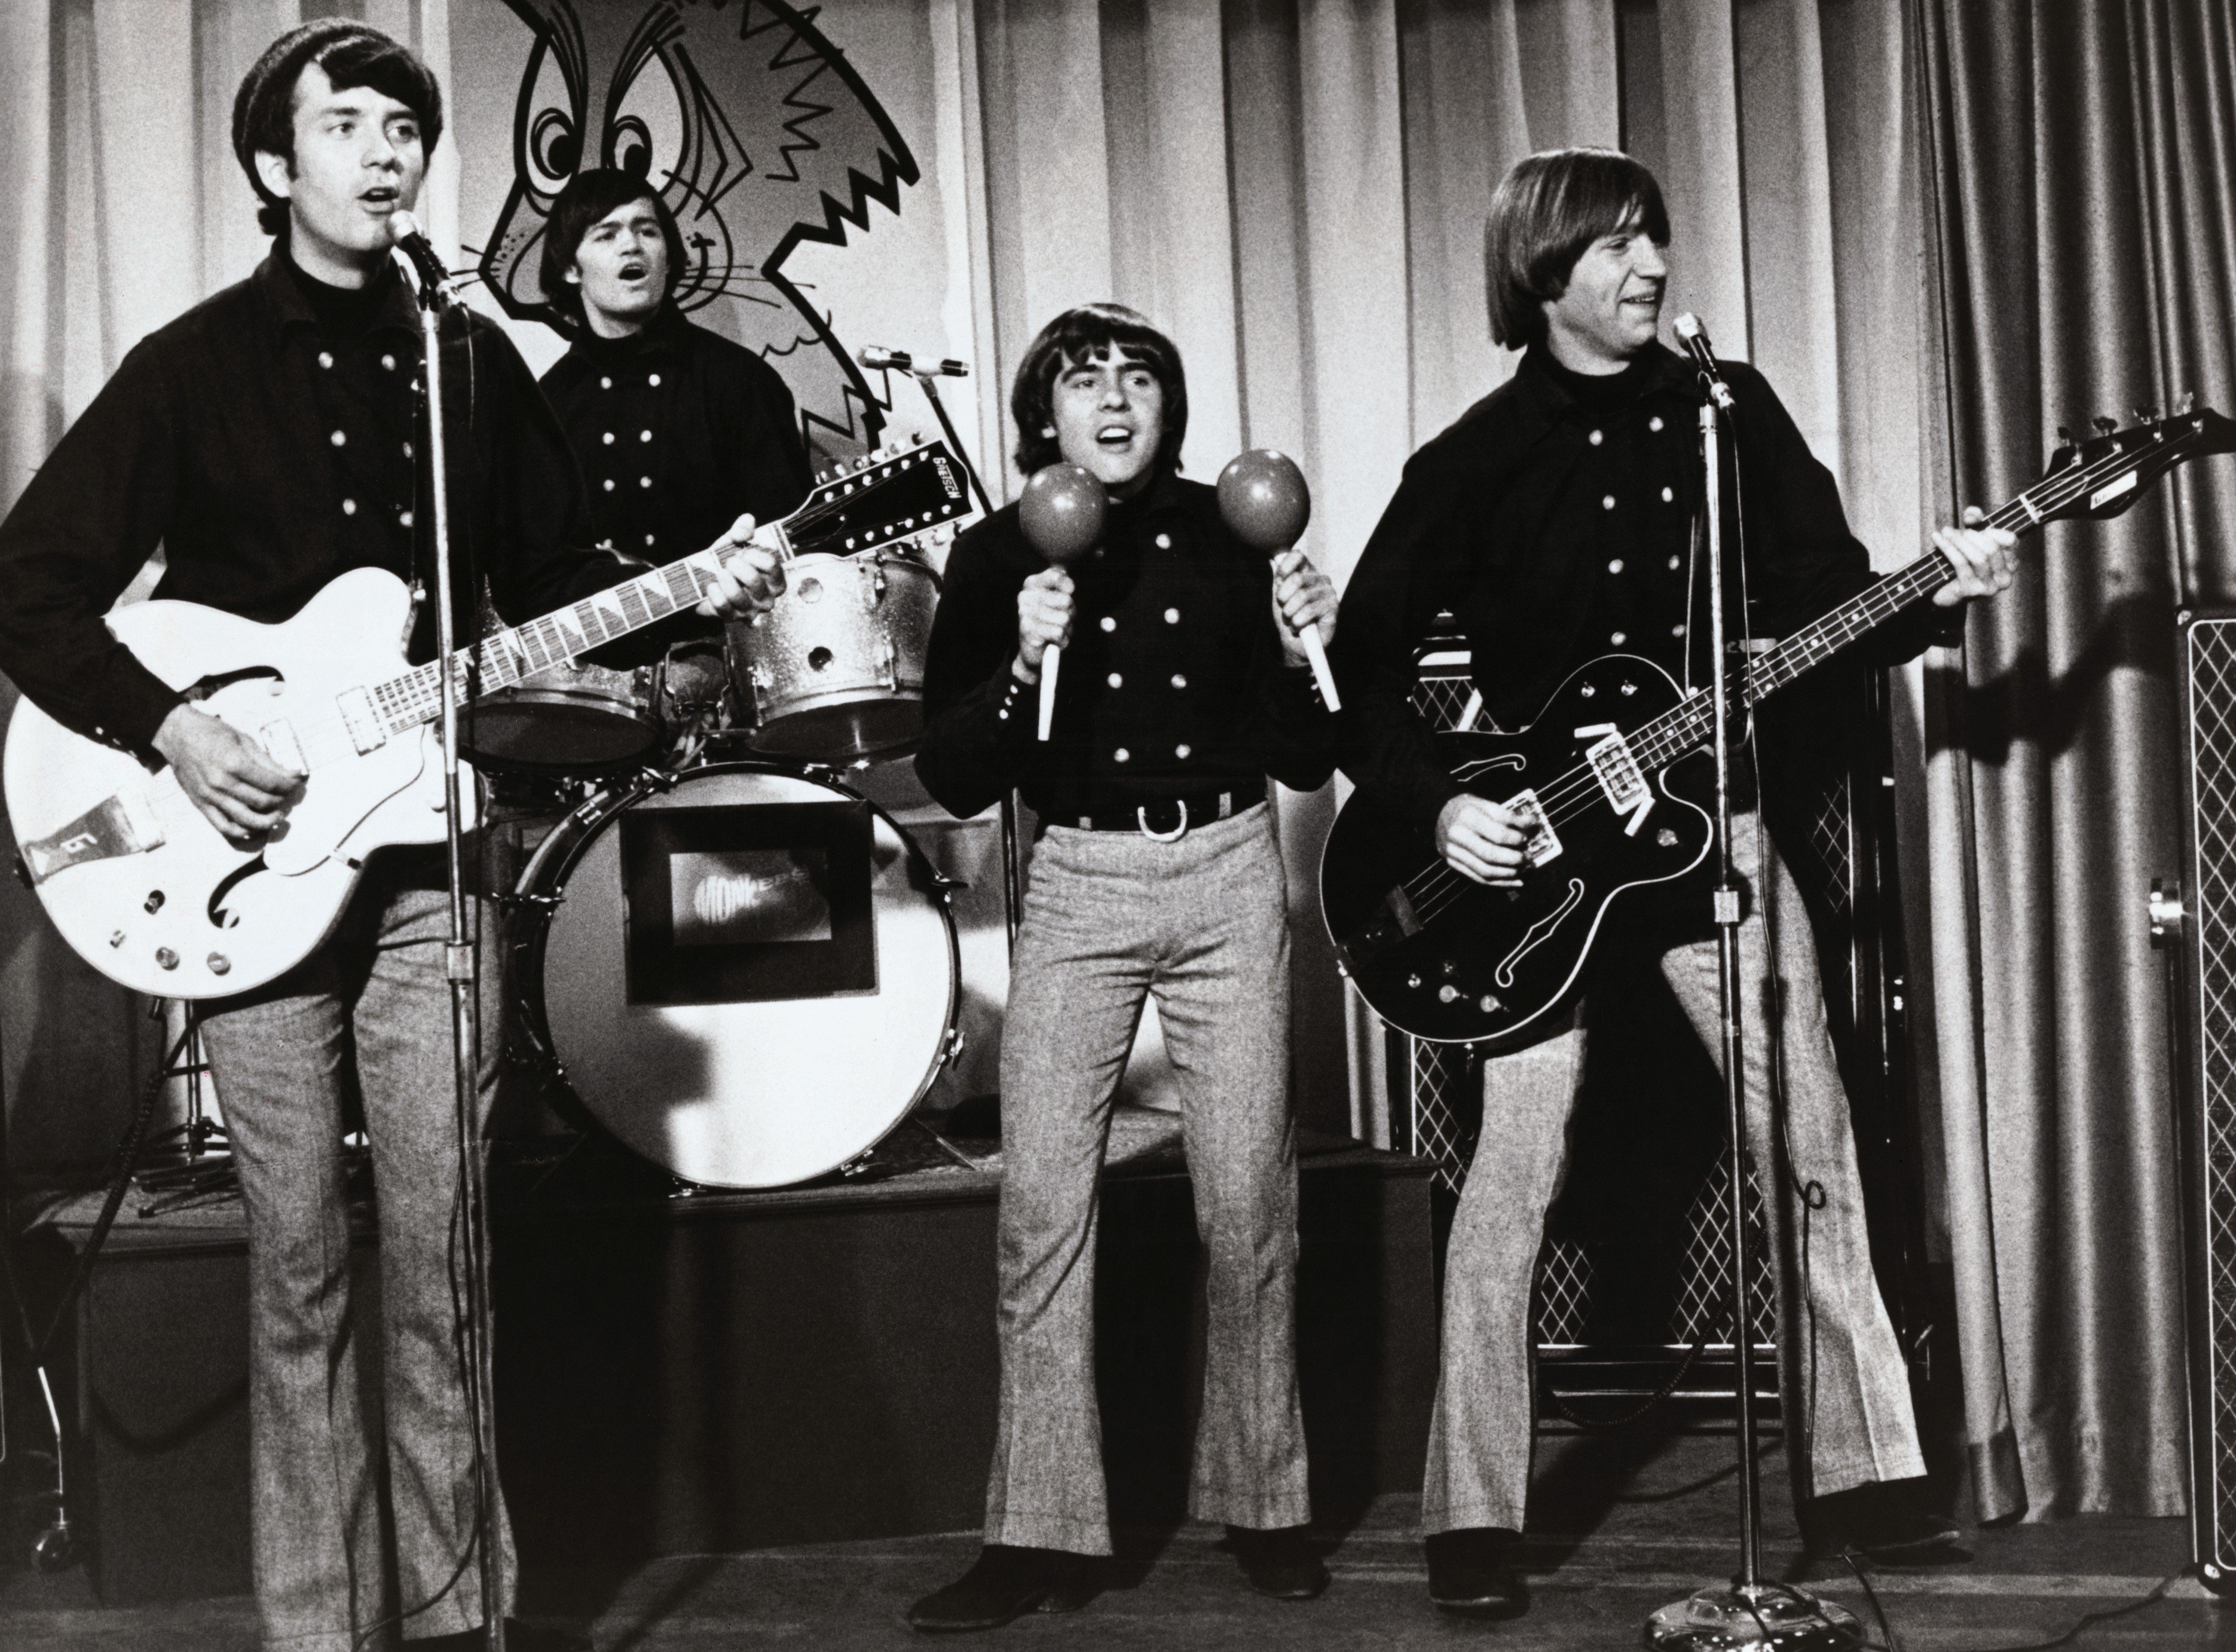 The Monkees' Mike Nesmith, Micky Dolenz, Davy Jones, and Peter Tork playing songs on a stage